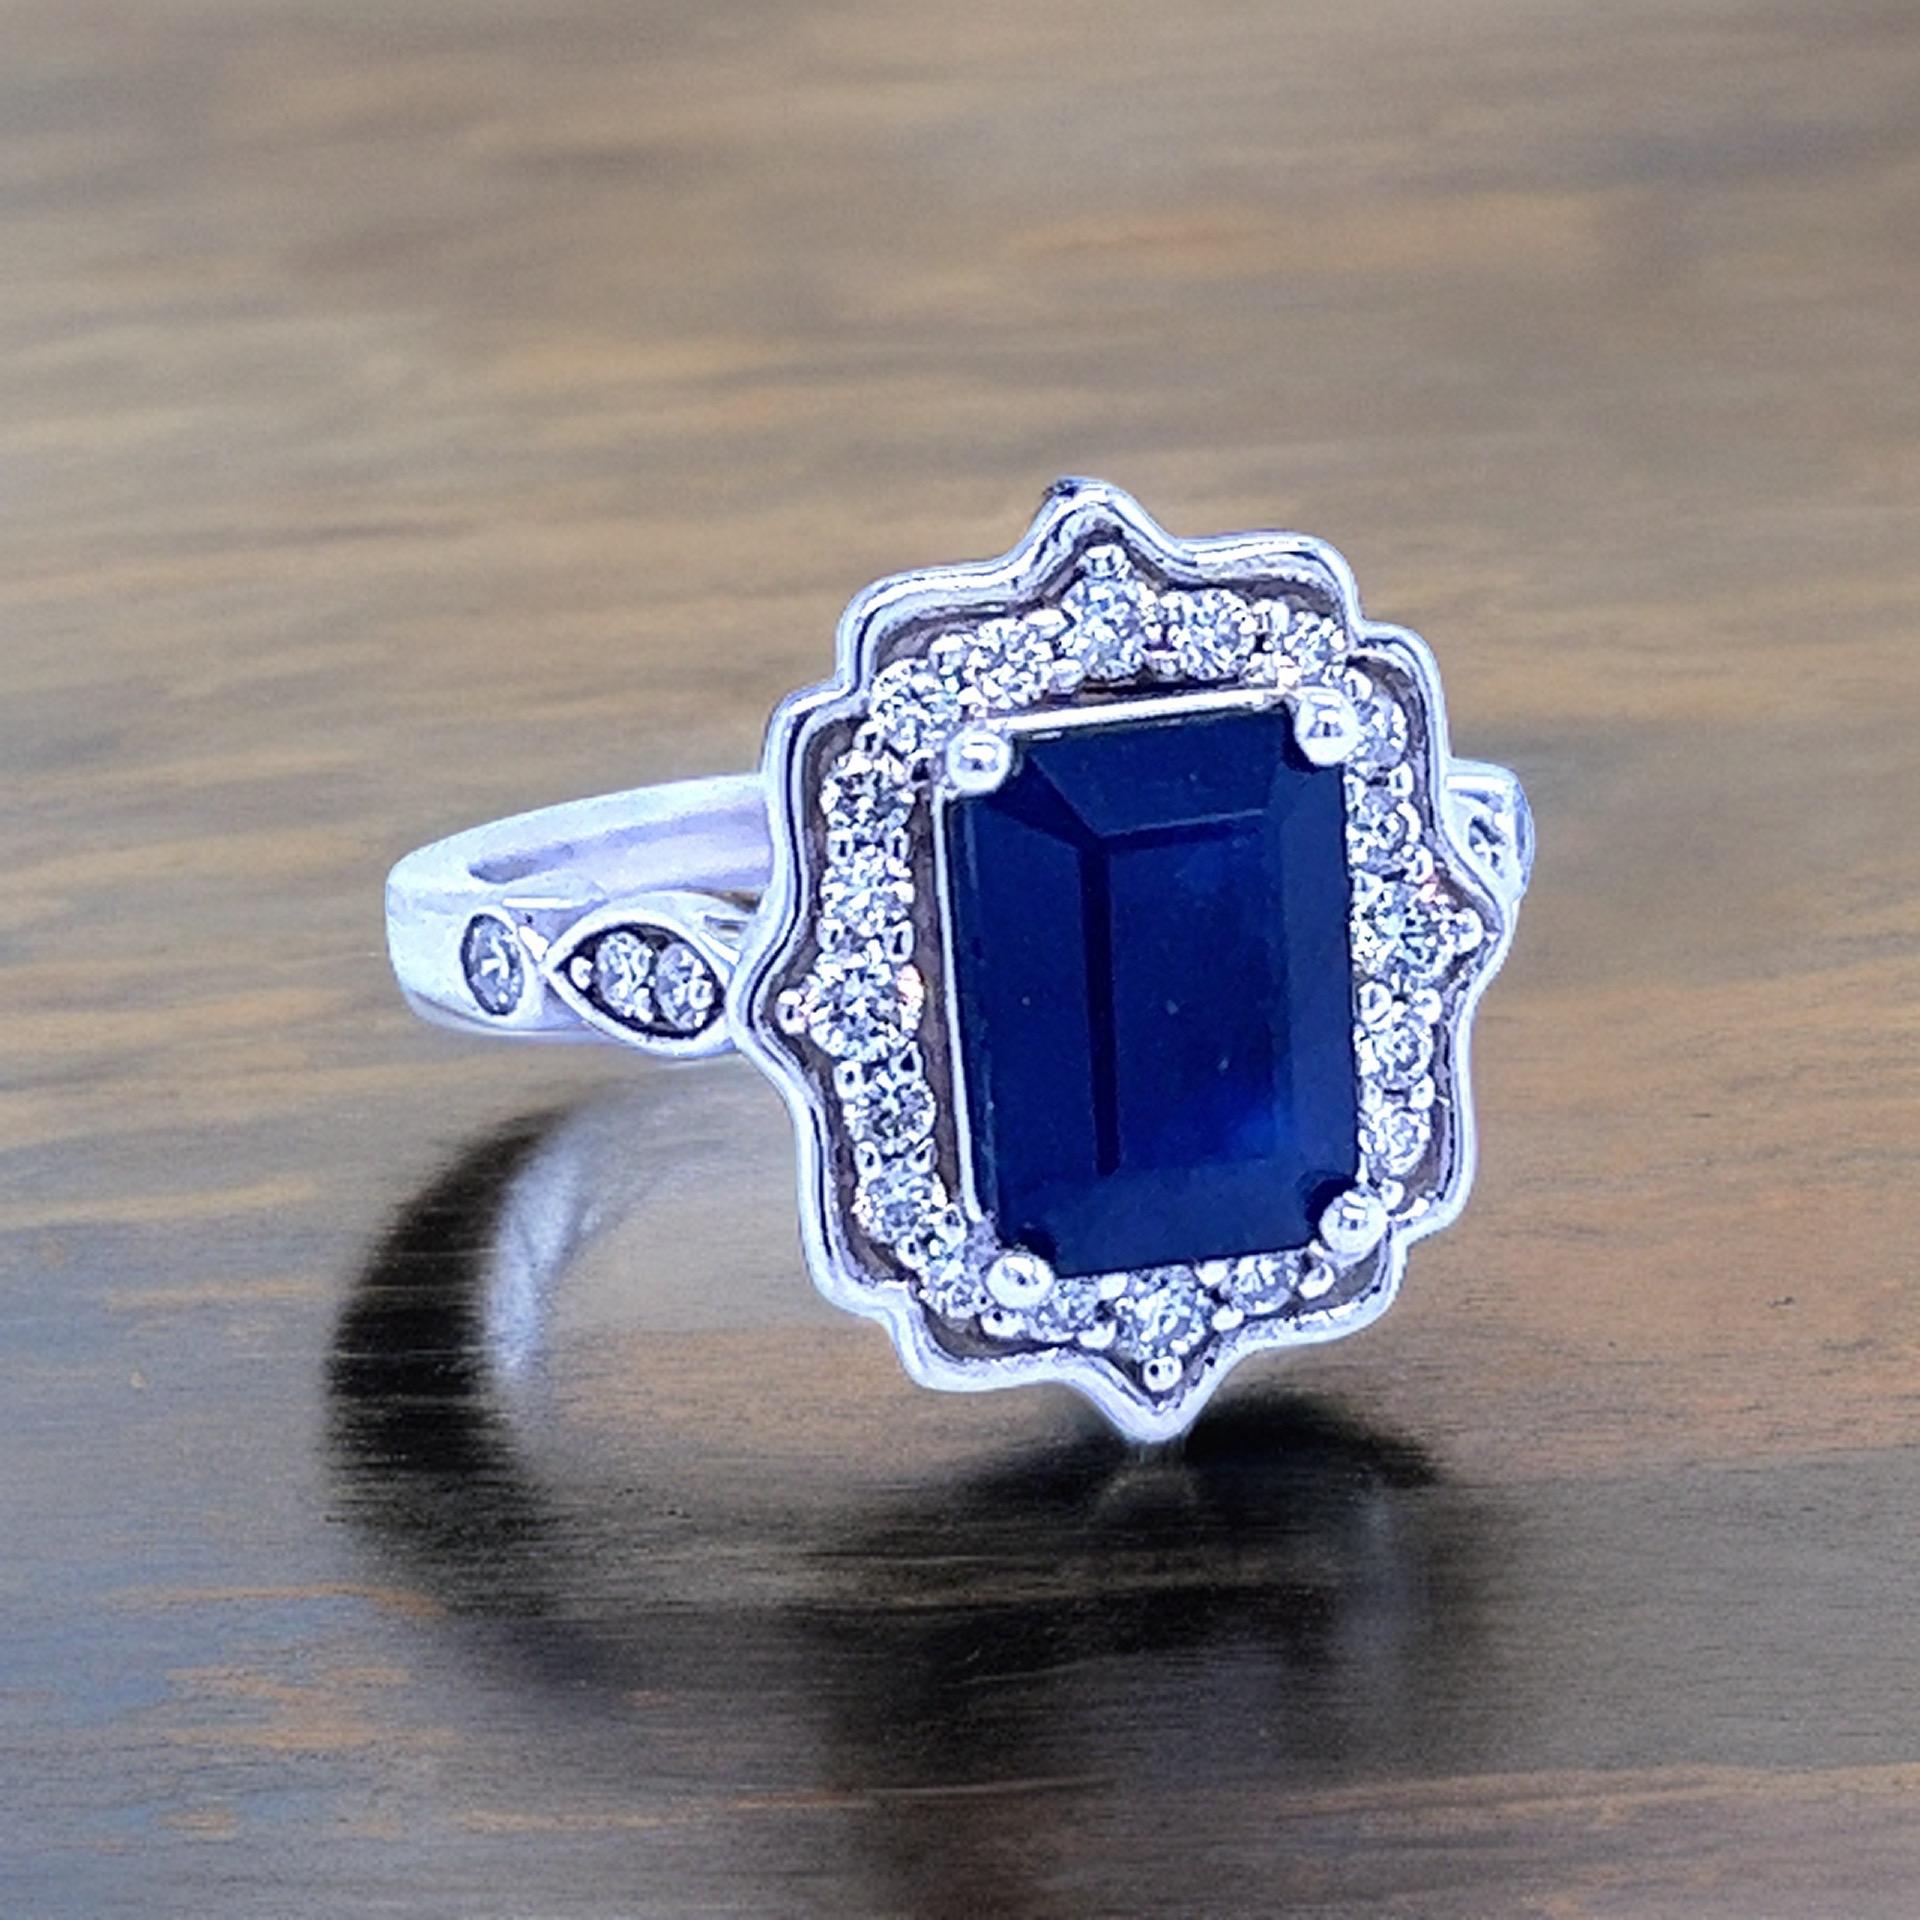 Natural Sapphire Diamond Ring 6.5 14k White Gold 3.51 TCW Certified For Sale 6